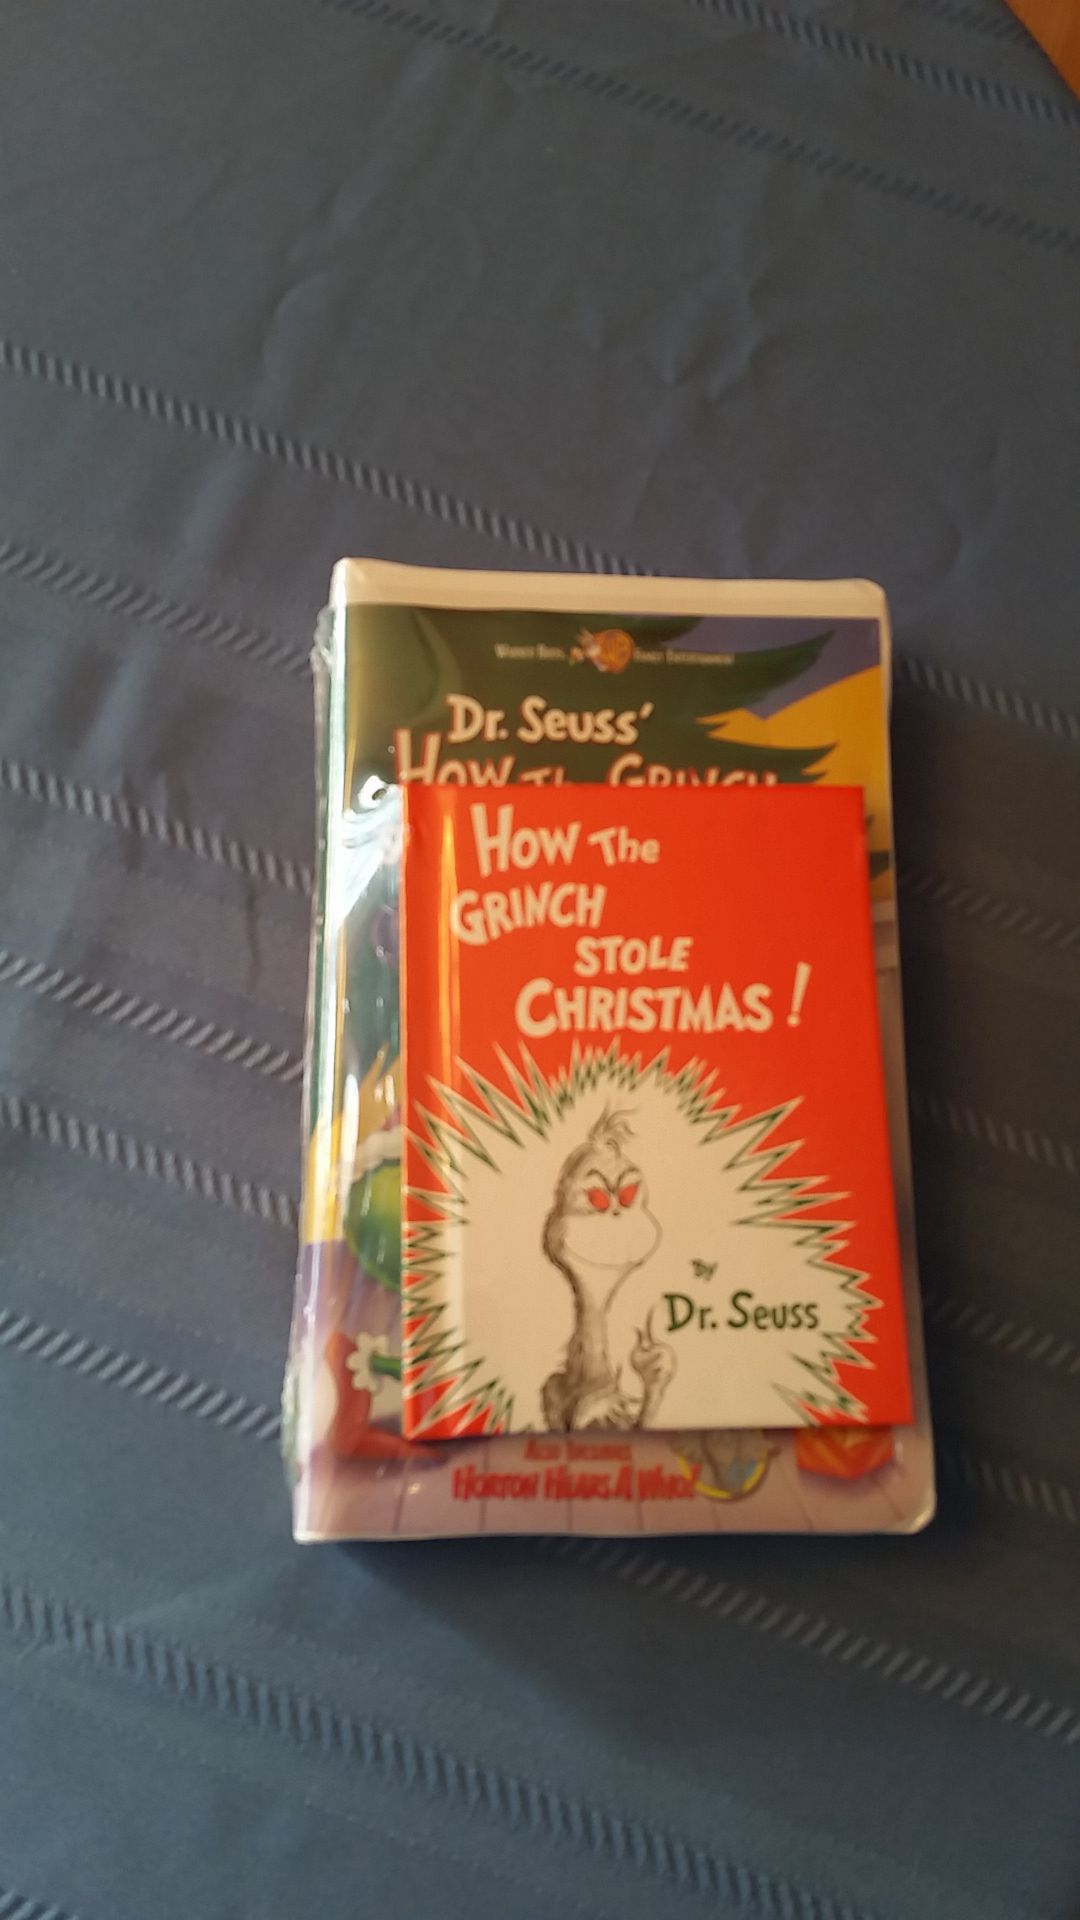 Dr. Seuss How The Grinch Stole Christmas. Factory sealed VHS with book.